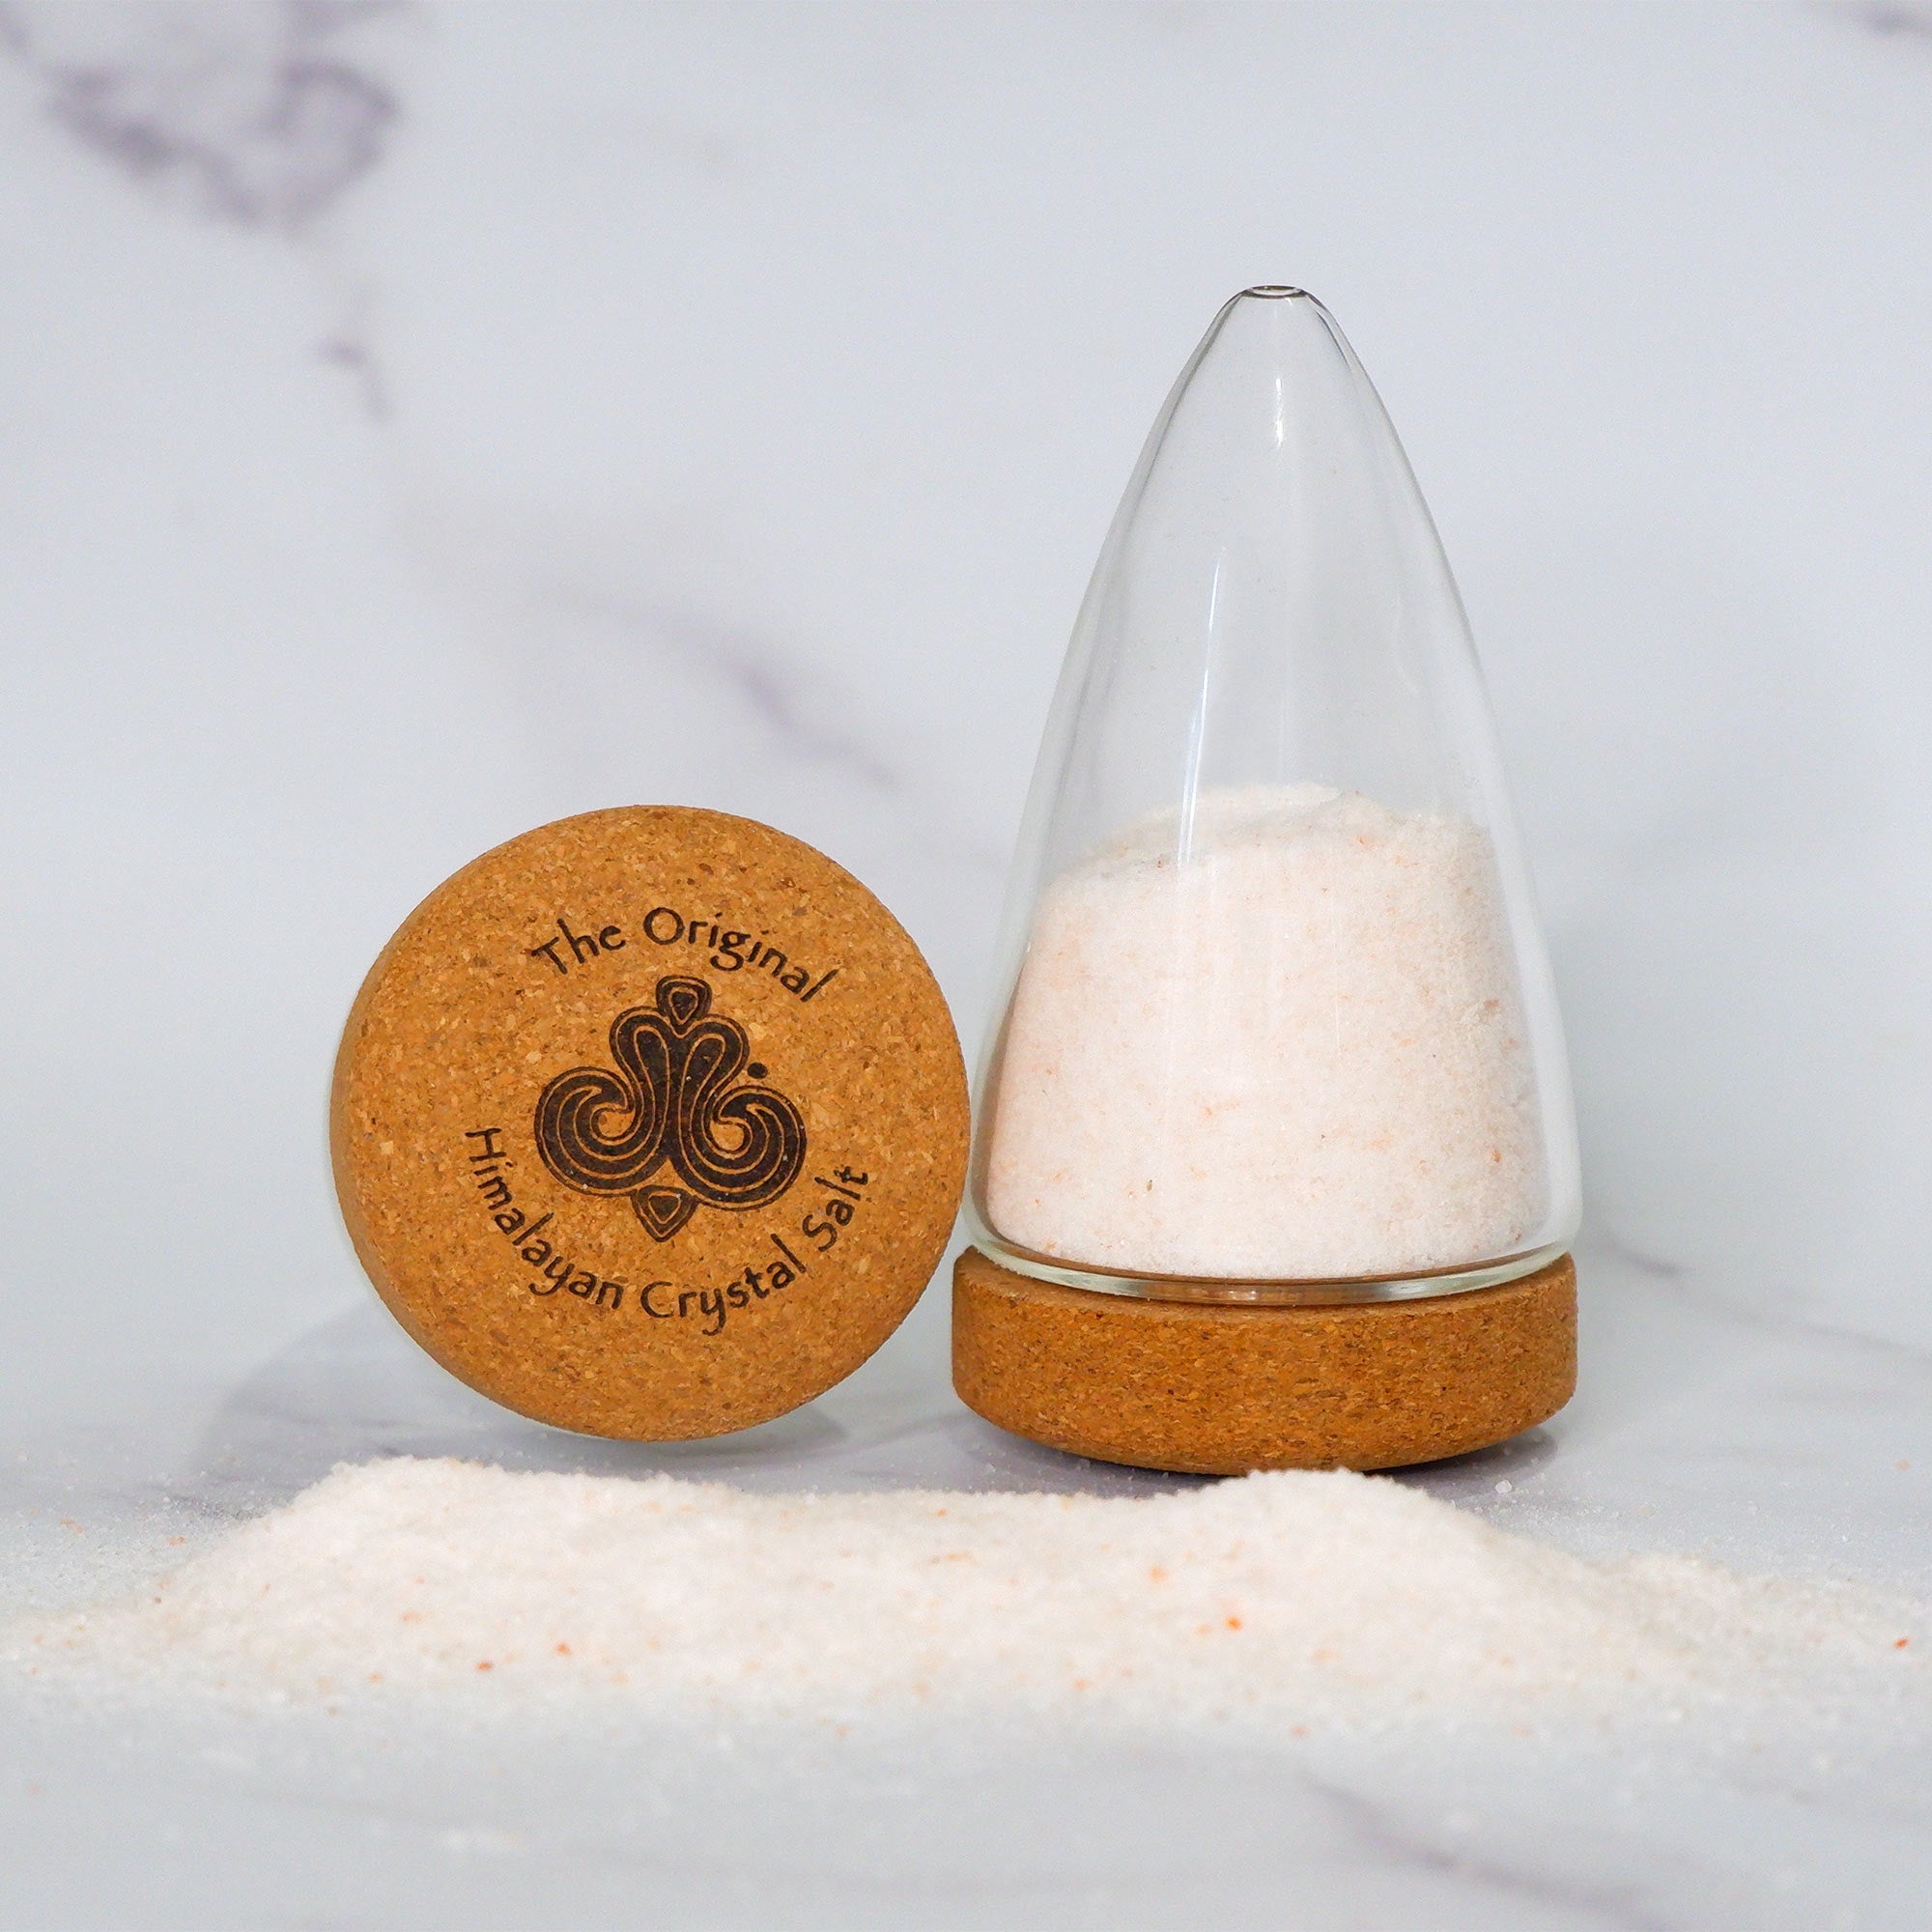 Fine Salt Shaker pointed cylindrical clear glass shaker with cork base with The Original Himalayan Crystal Salt logo, filled with Himalayan crystal salt and more salt on gray countertop